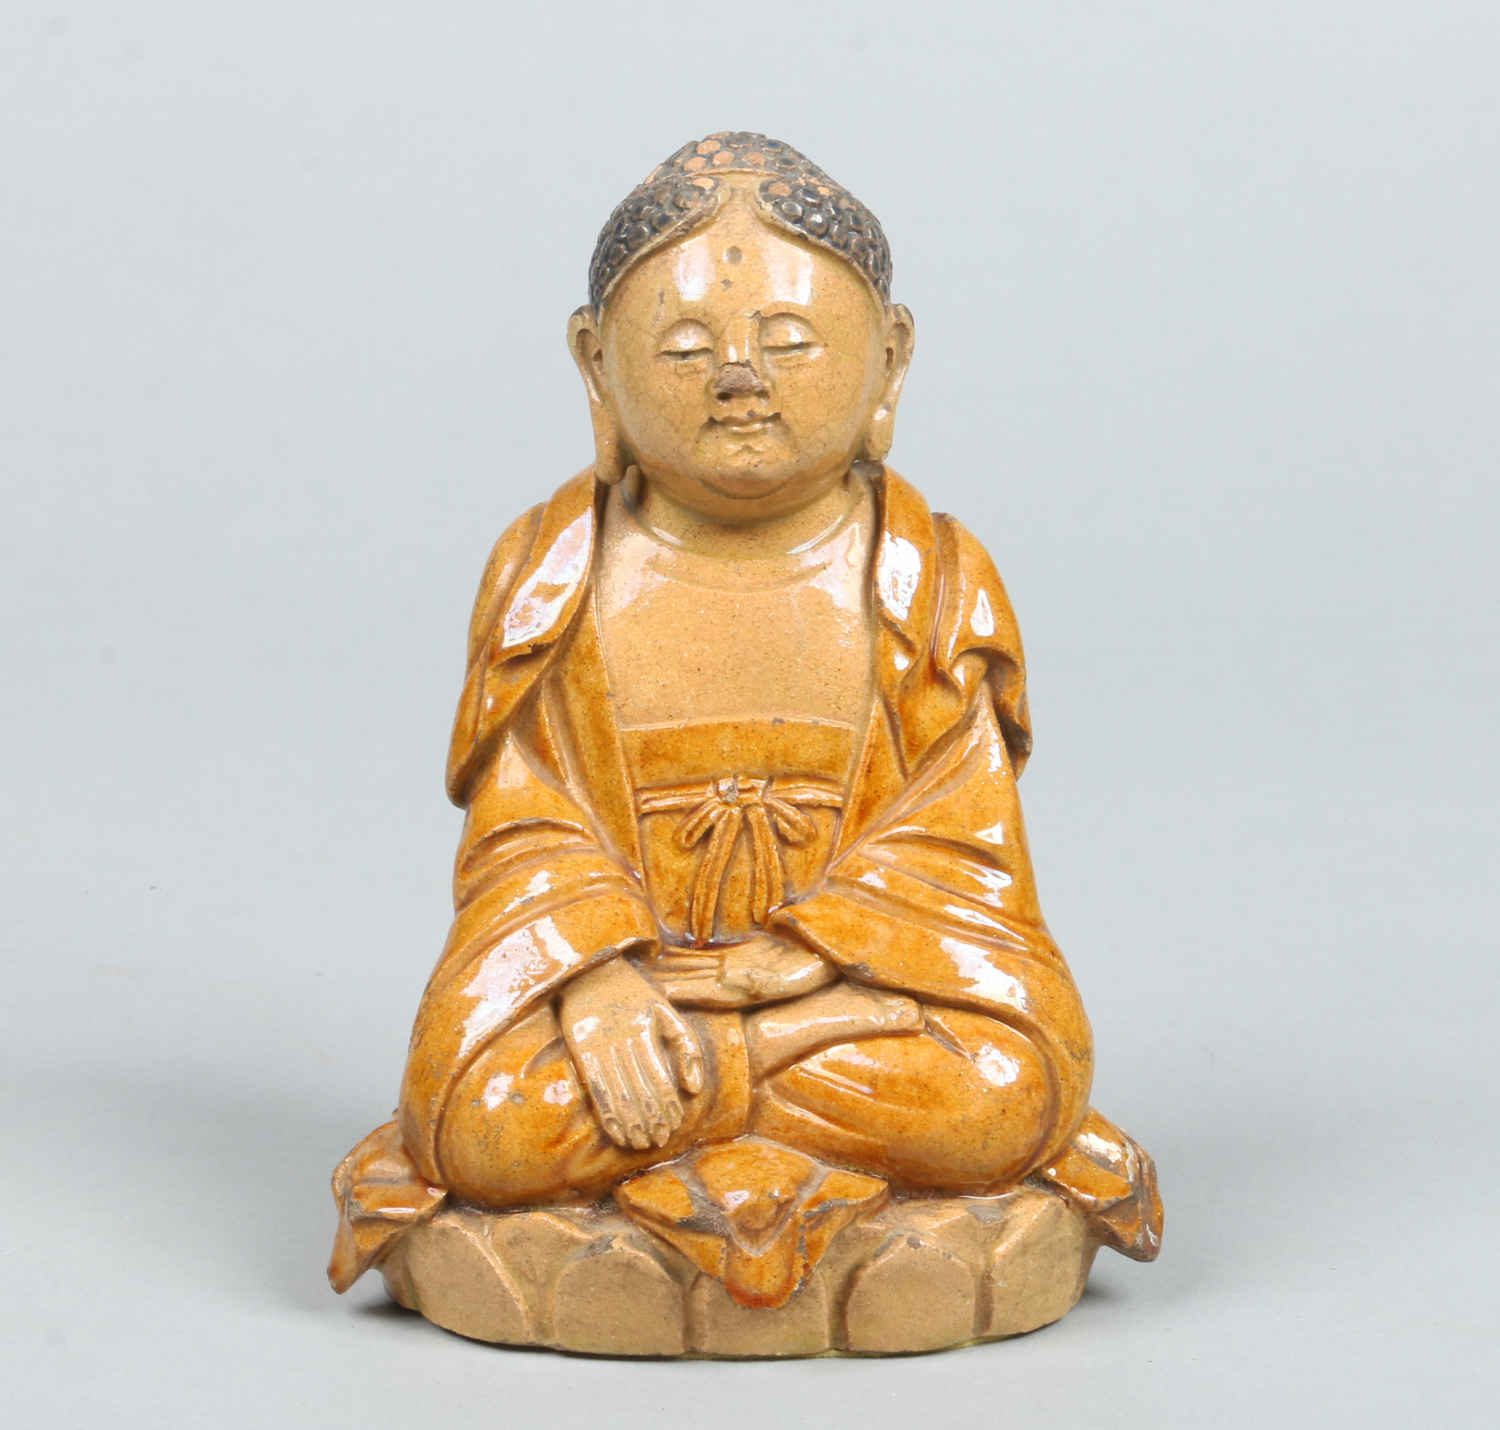 A Chinese earthenware figure of a seated meditating Buddha raised on a lotus plinth and in ochre